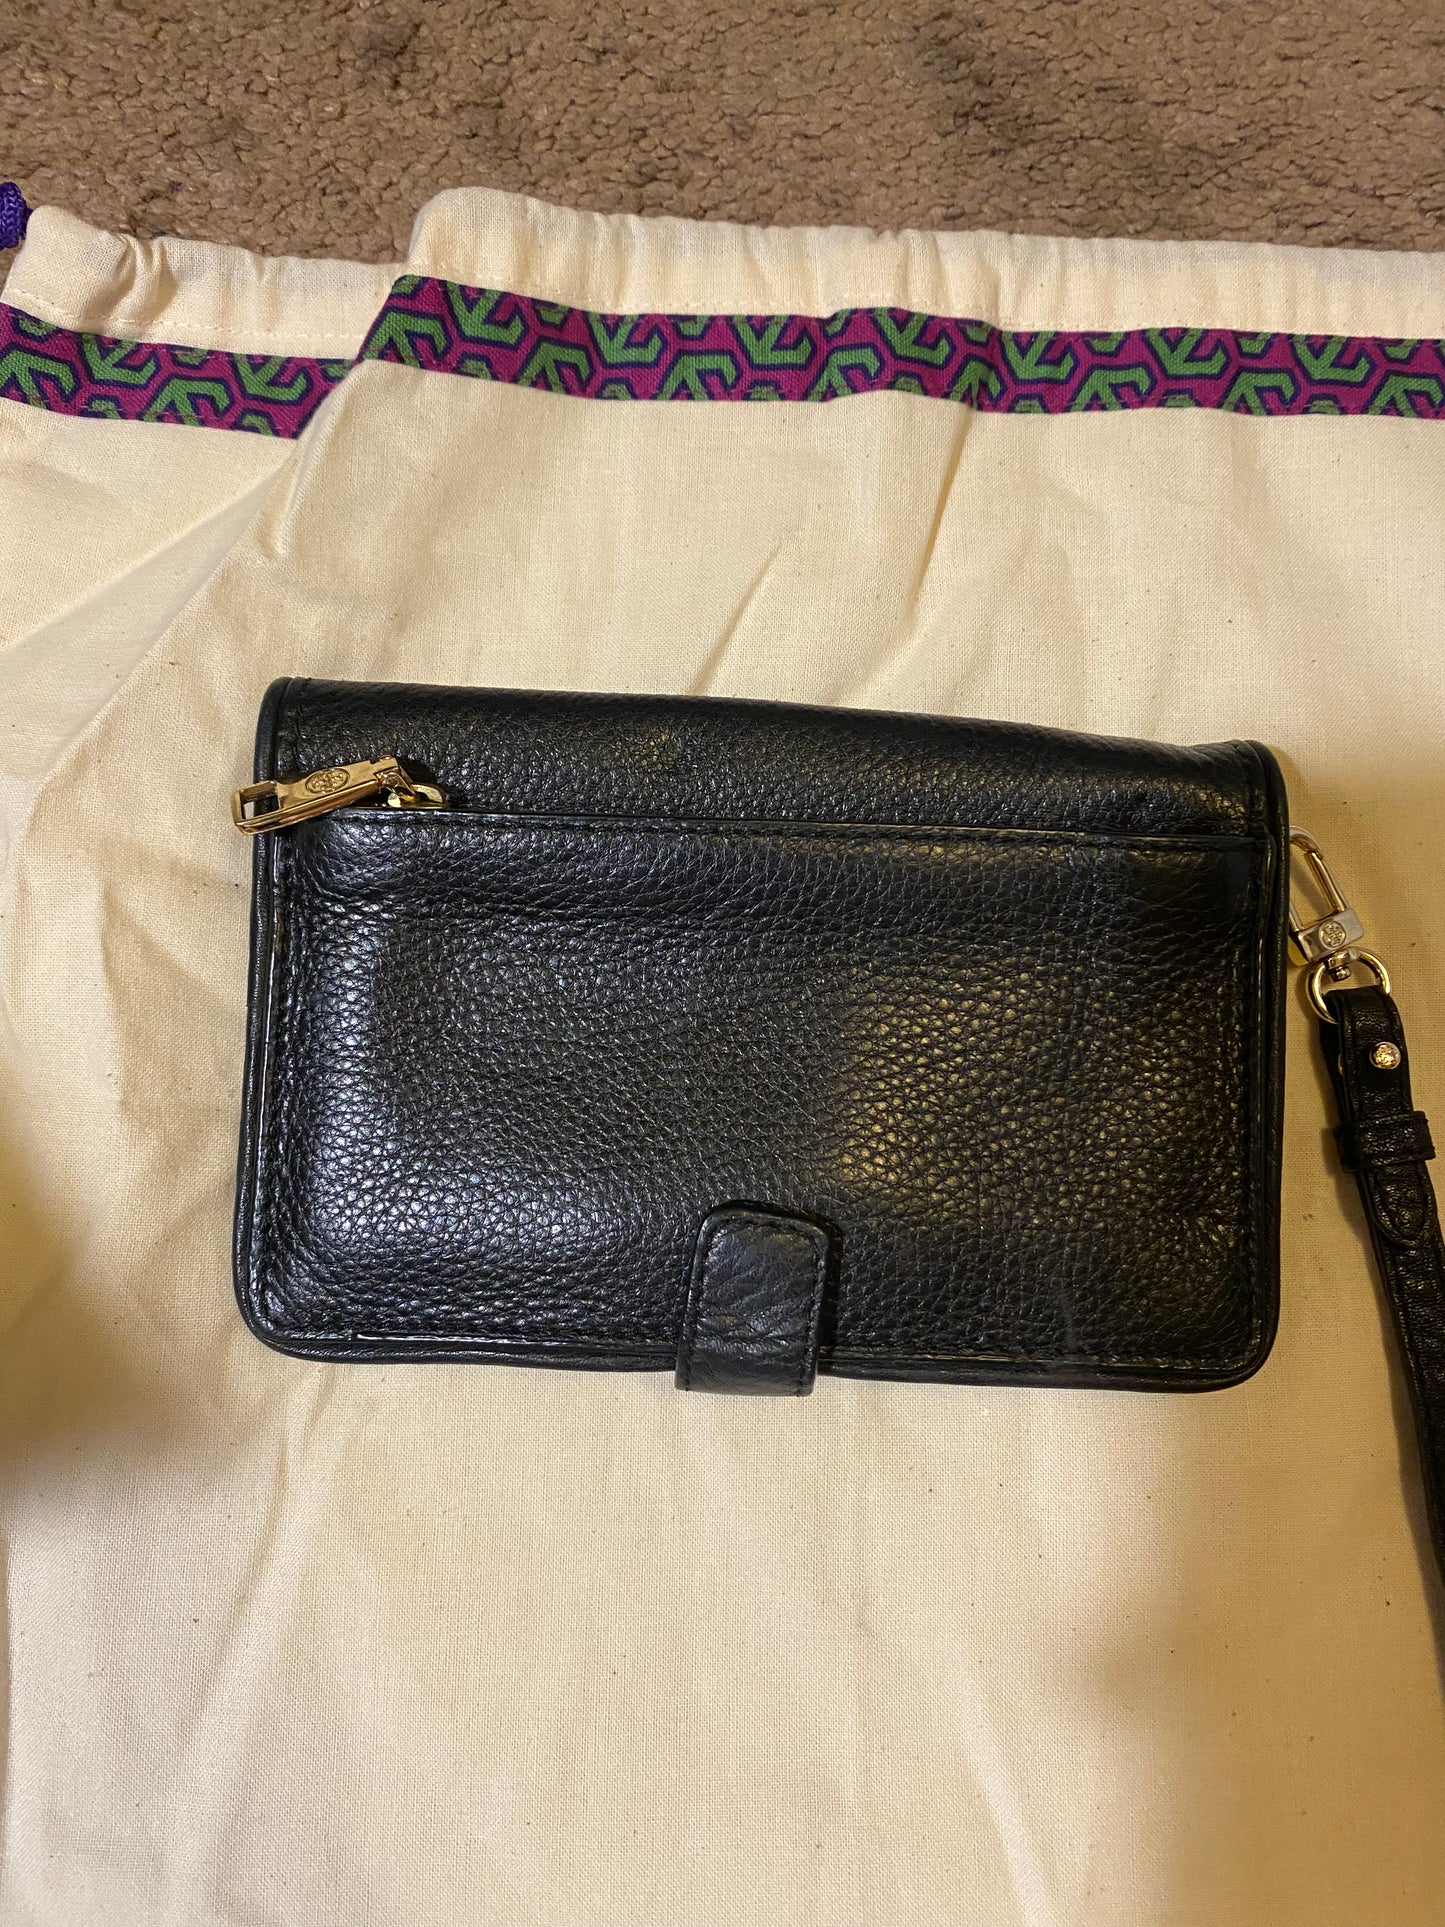 Used Accessories: Tory Burch Wallet